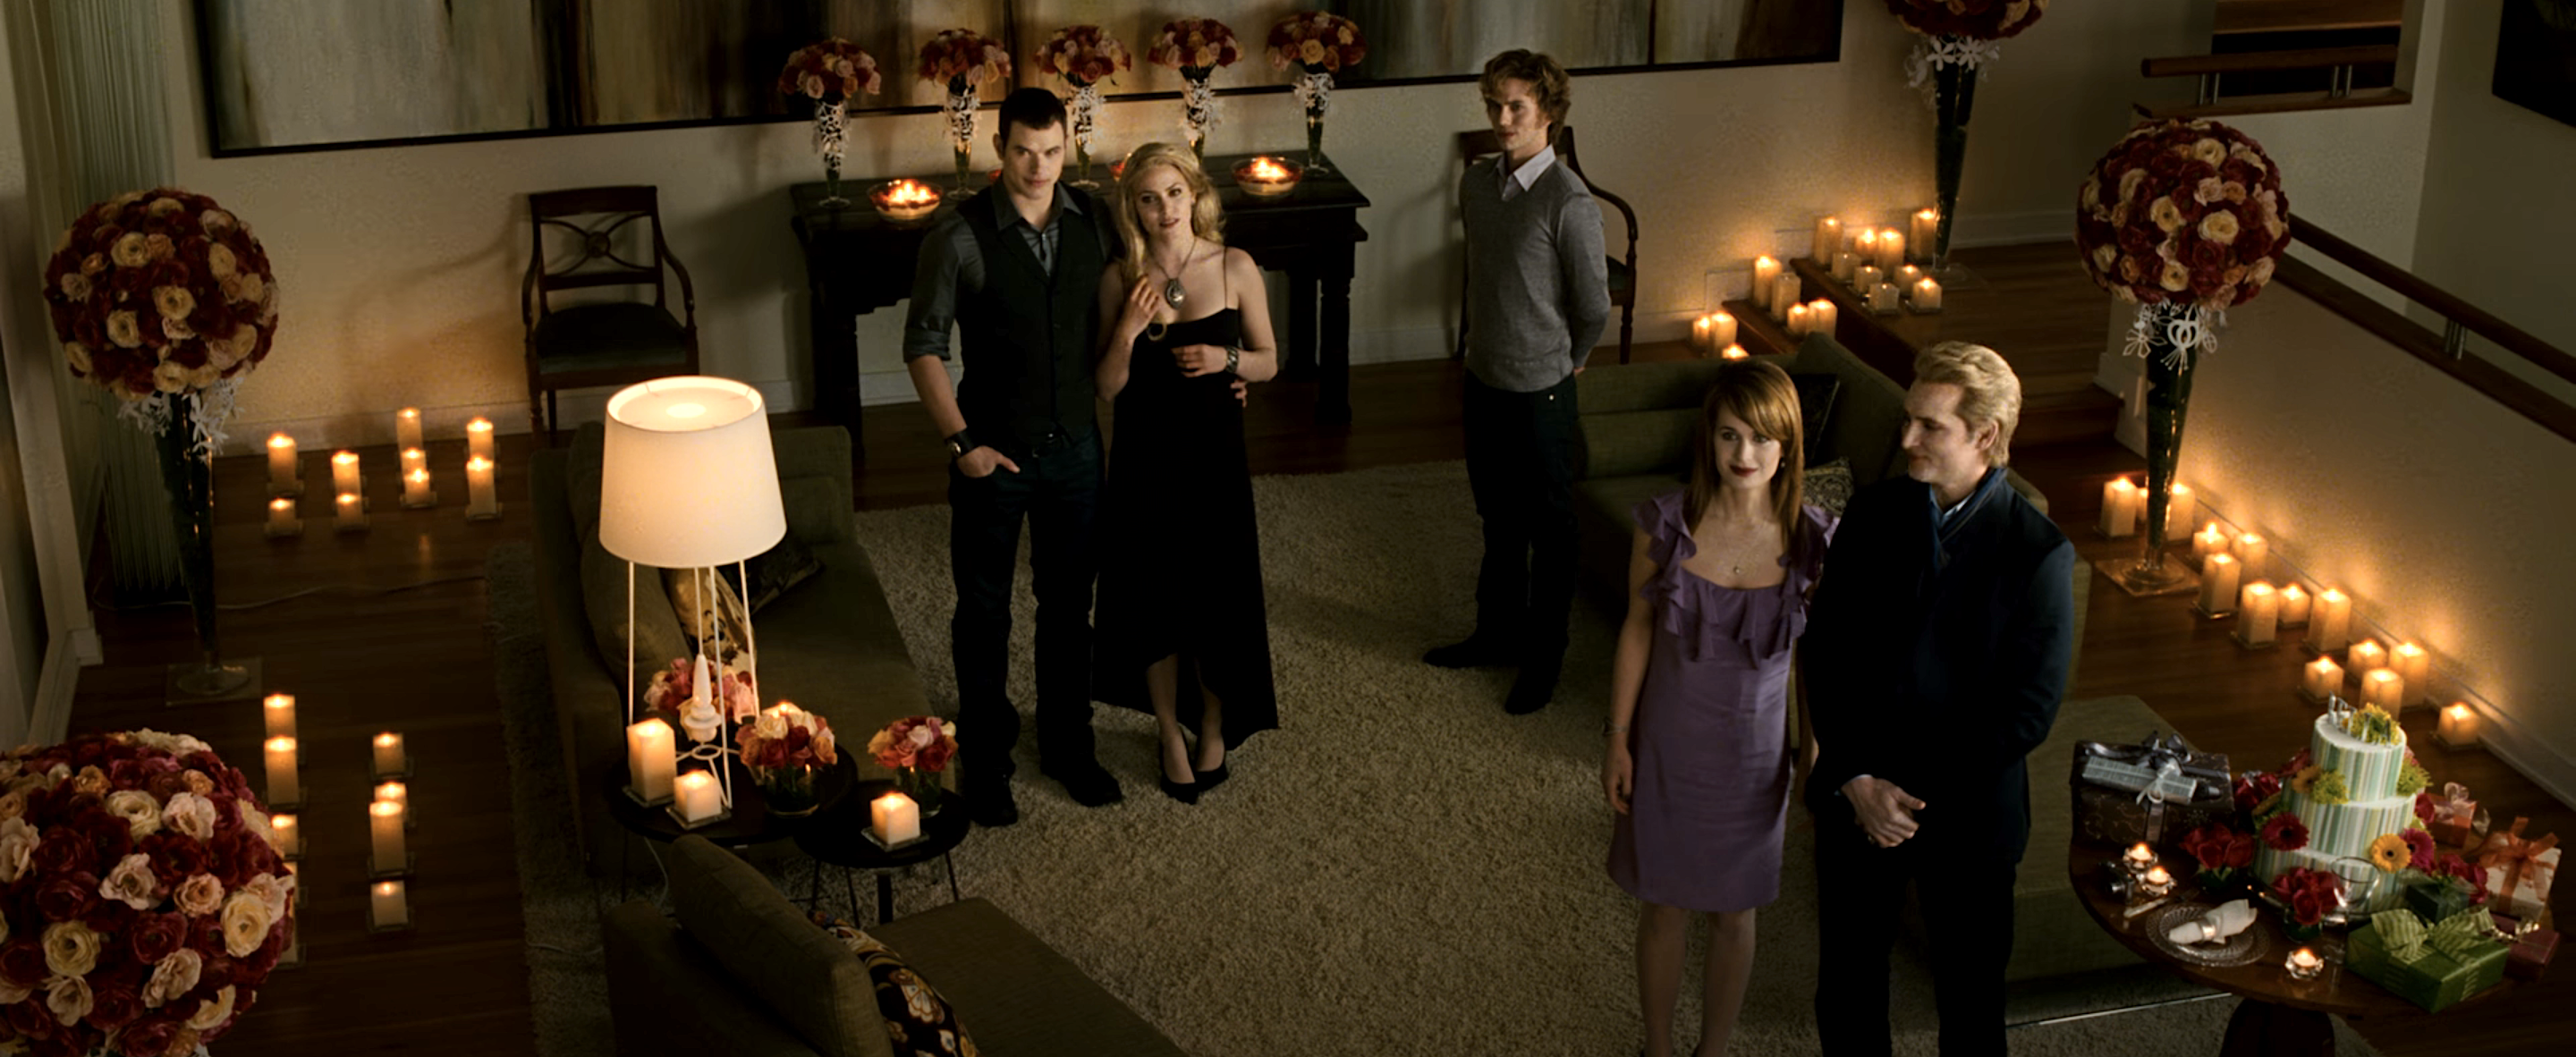 The Cullen family standing in their living room